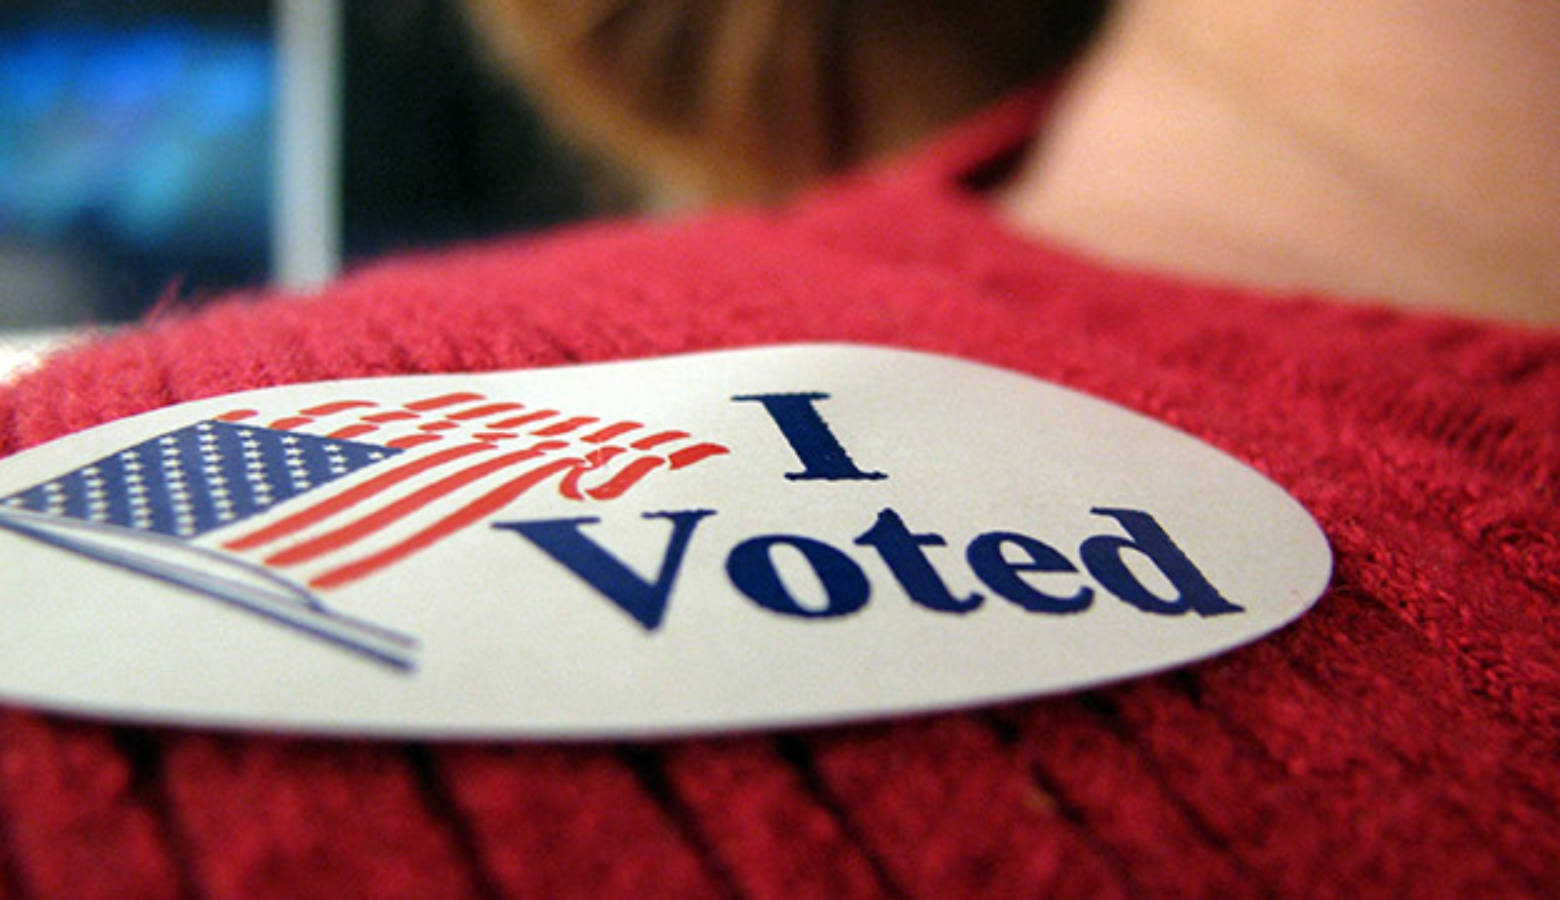 Indiana’s early voting turnout this year is well ahead of the last two midterm elections. (Jessica Whittle Photography/Flickr)